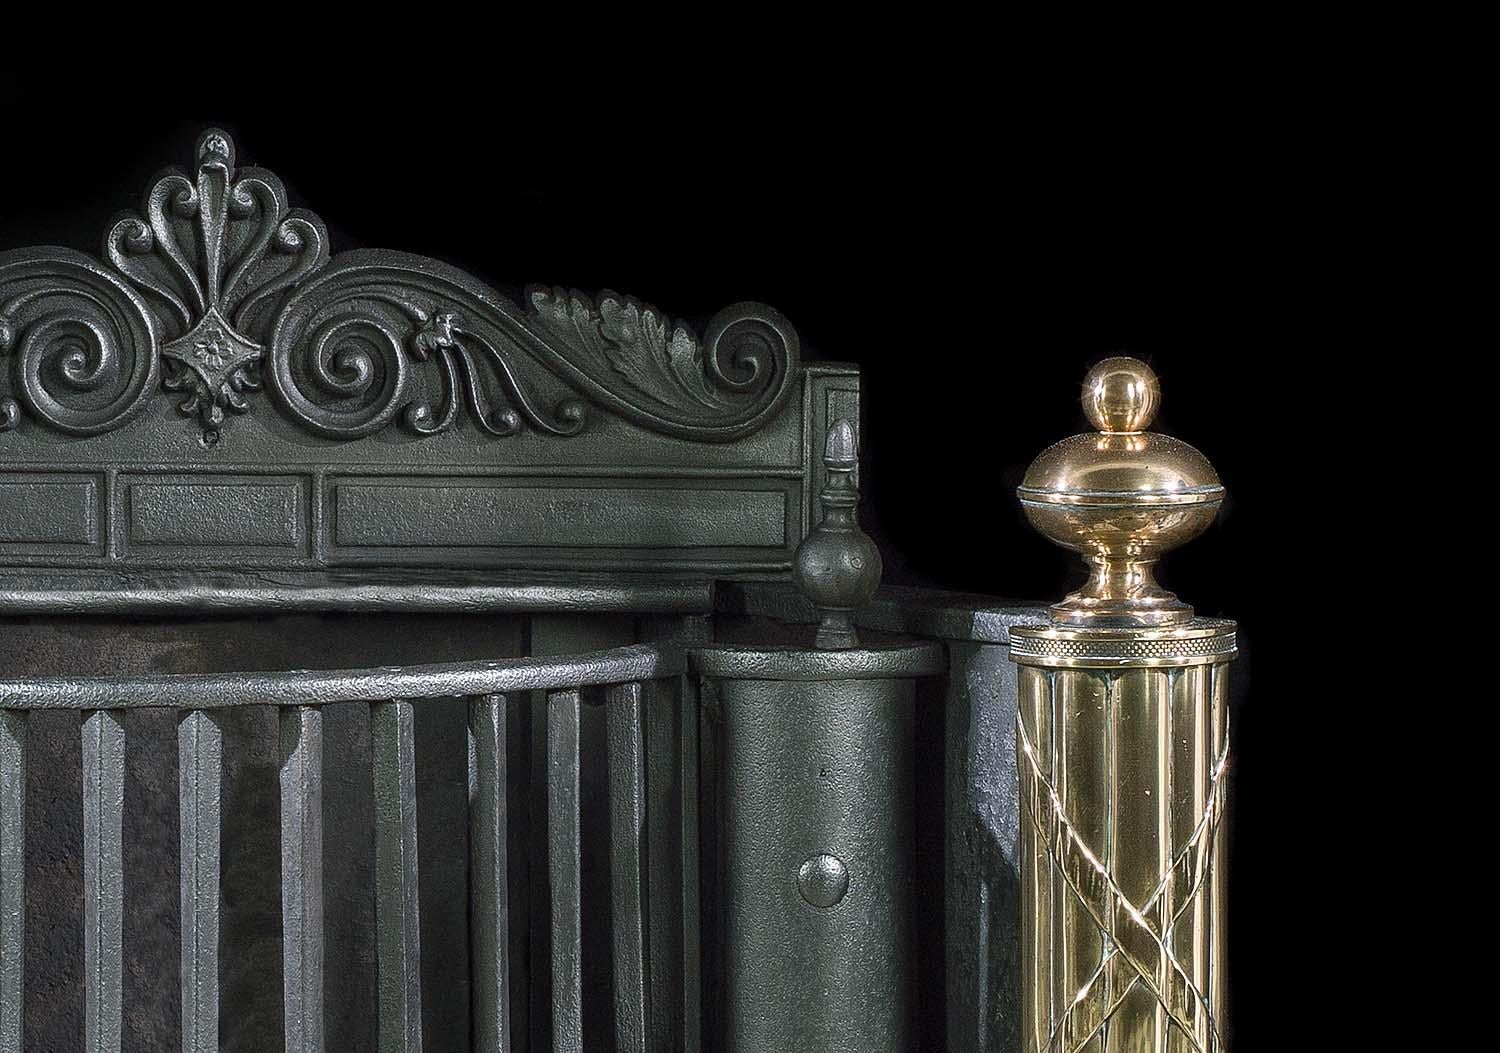 A large and impressive English Regency iron, steel and polished brass antique fire basket with a decorative stele crest backplate. The deep bow fronted grate, above a cut and linked medallion skirt, is supported by a pair of large brass standards